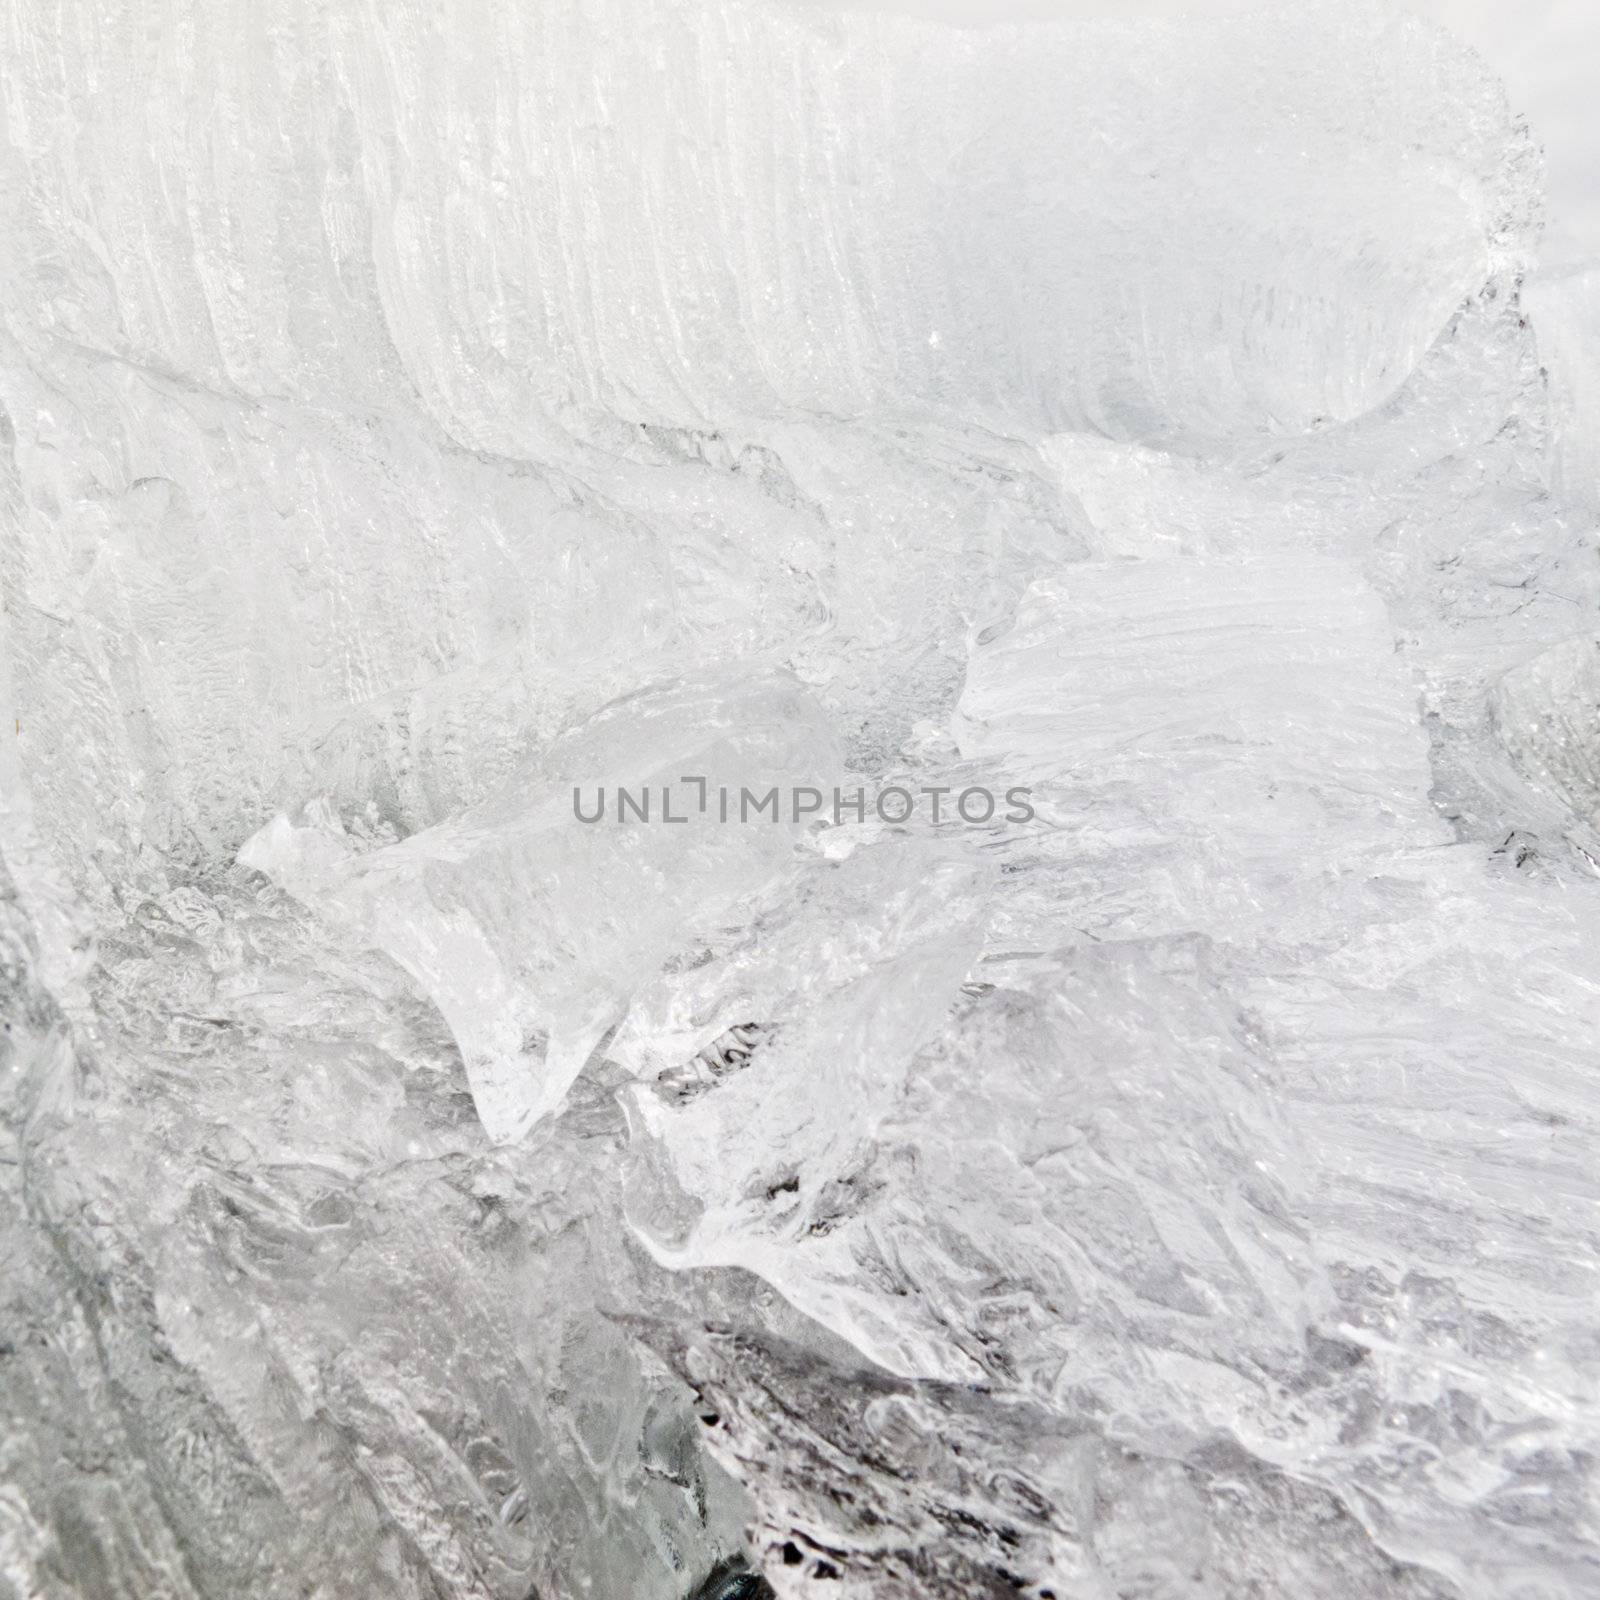 Background texture pattern of disintegrating candelized melting ice